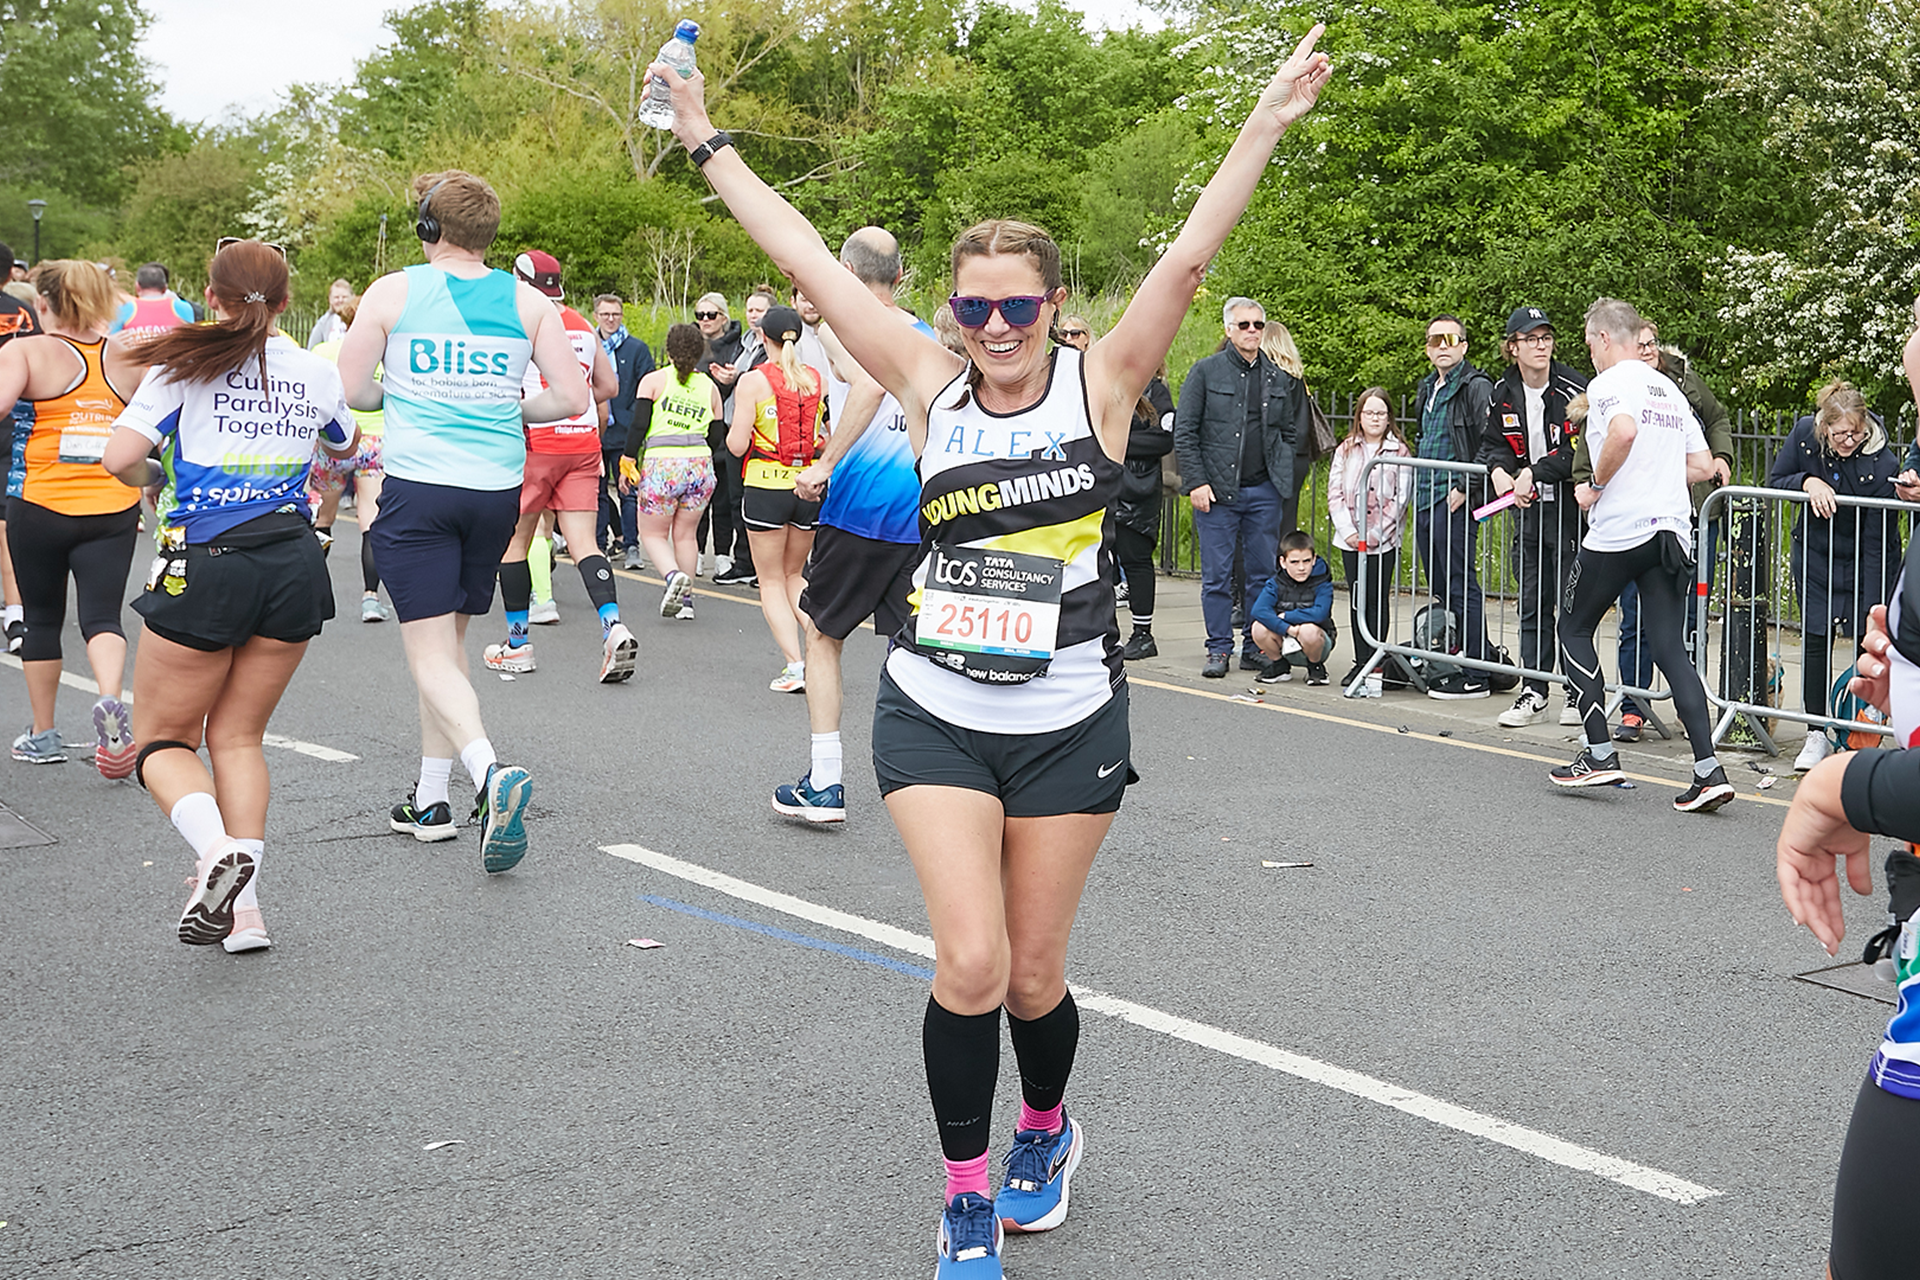 A YoungMinds marathon runner running with their hands in the air and smiling.